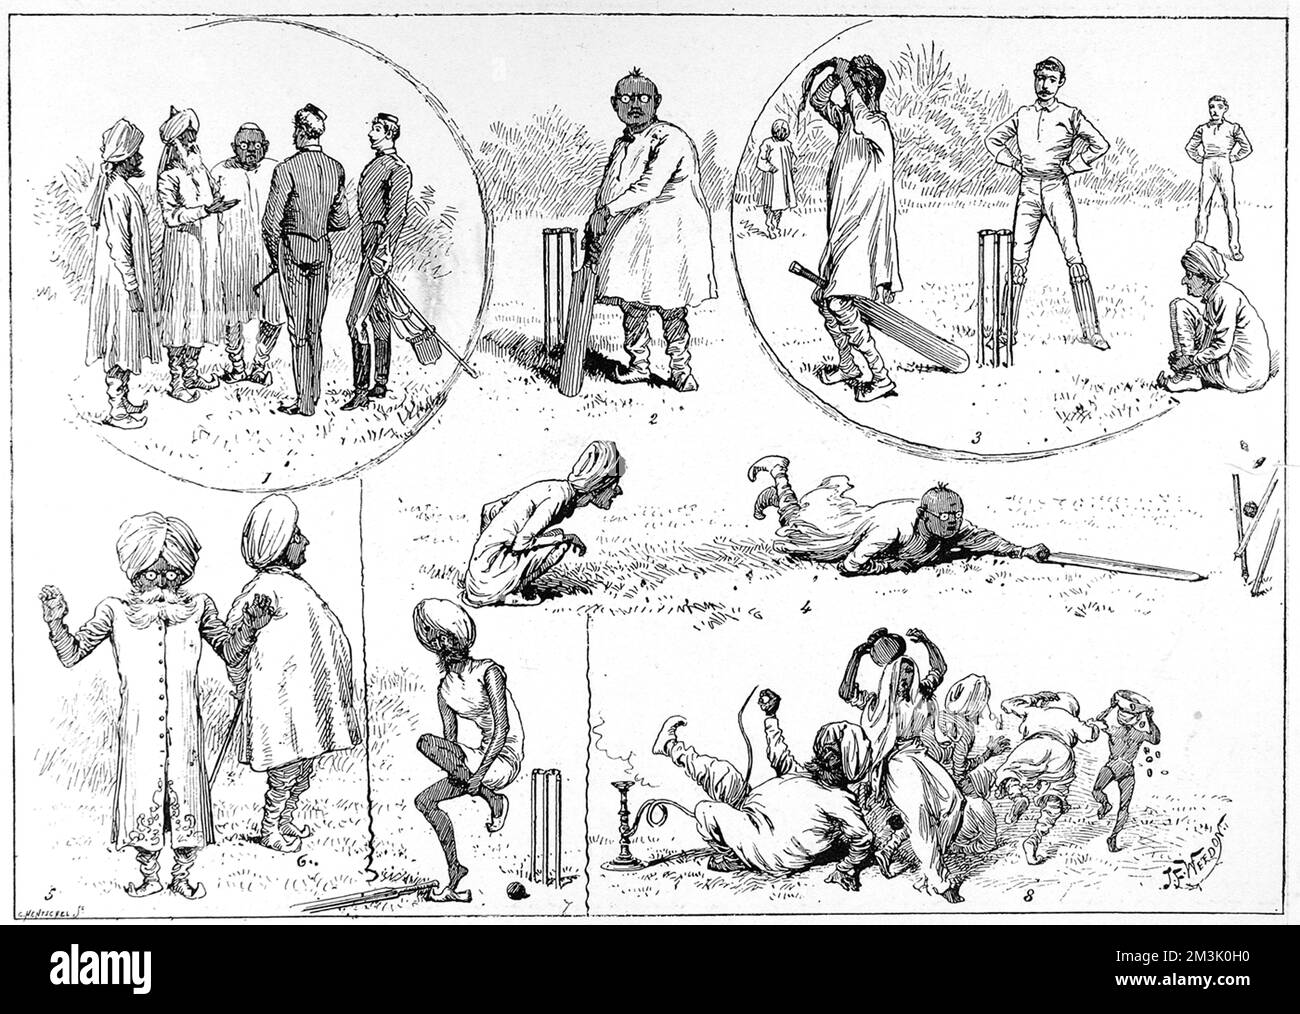 A series of sketches by an English Cavalry Officer of a game of cricket played between an Indian College and British Officers, in India, 1890.      The correspondent who sent in the account of this match wished to remain anonymous and gave little in the way of details about the match.  Indeed the Indian College was given the pseudonym 'The Progress College of Arts and Sciences' and the location was not disclosed.      The Illustrated London News editor who wrote the original caption said there was a 'touch of caricature' in their depiction of the Indian players, but hoped 'the joke would be ta Stock Photo